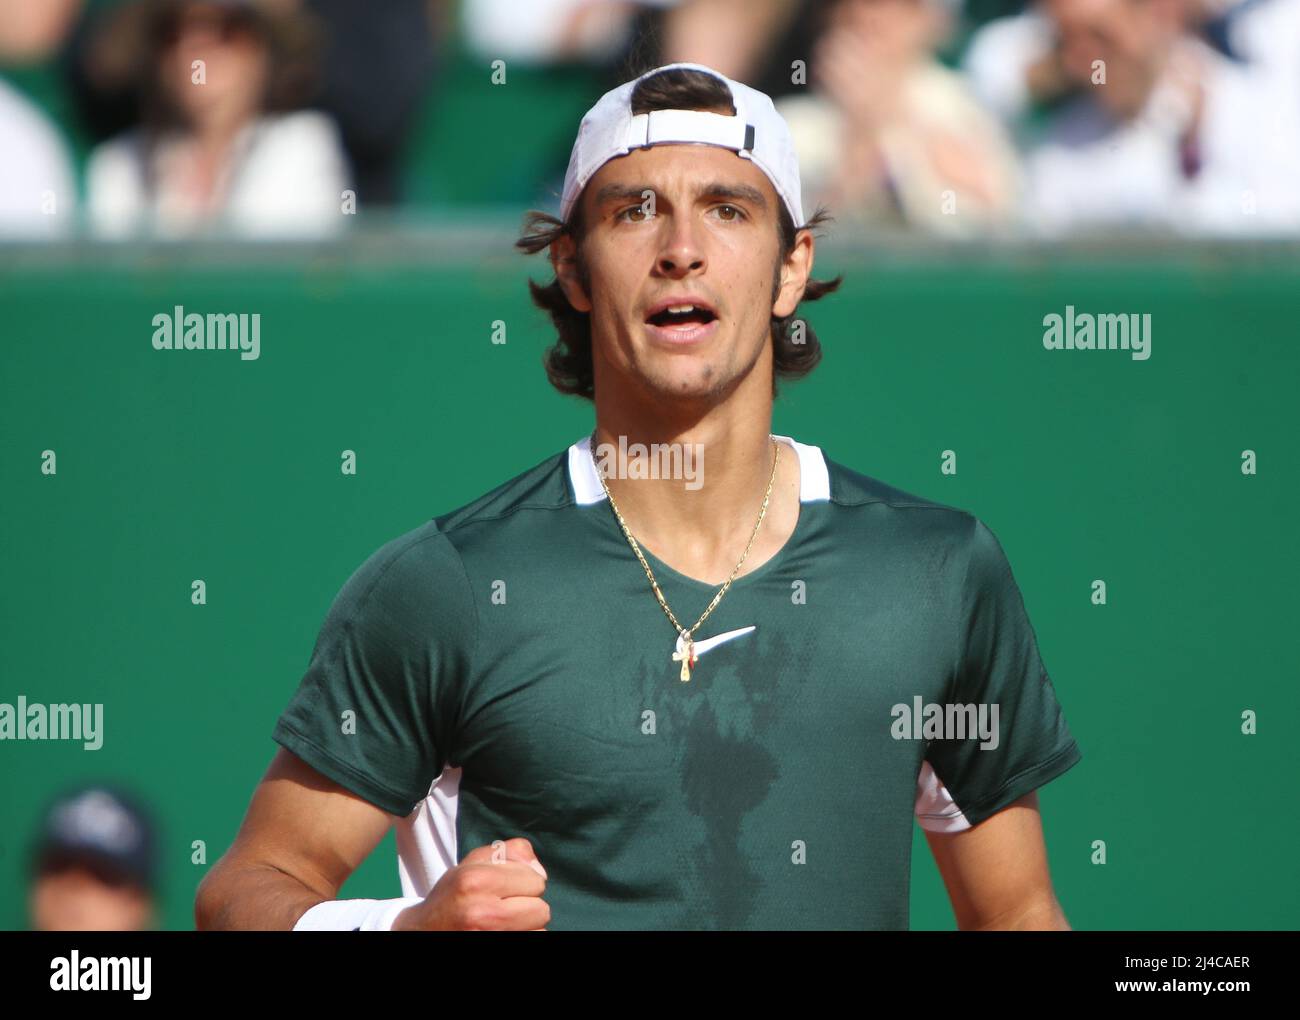 April 13, 2022, Roquebrune-Cap-Martin, France: Lorenzo Musetti of Italy  during the Rolex Monte-Carlo Masters 2022, ATP Masters 1000 tennis  tournament on April 13, 2022 at Monte-Carlo Country Club in Roquebrune-Cap- Martin, France -